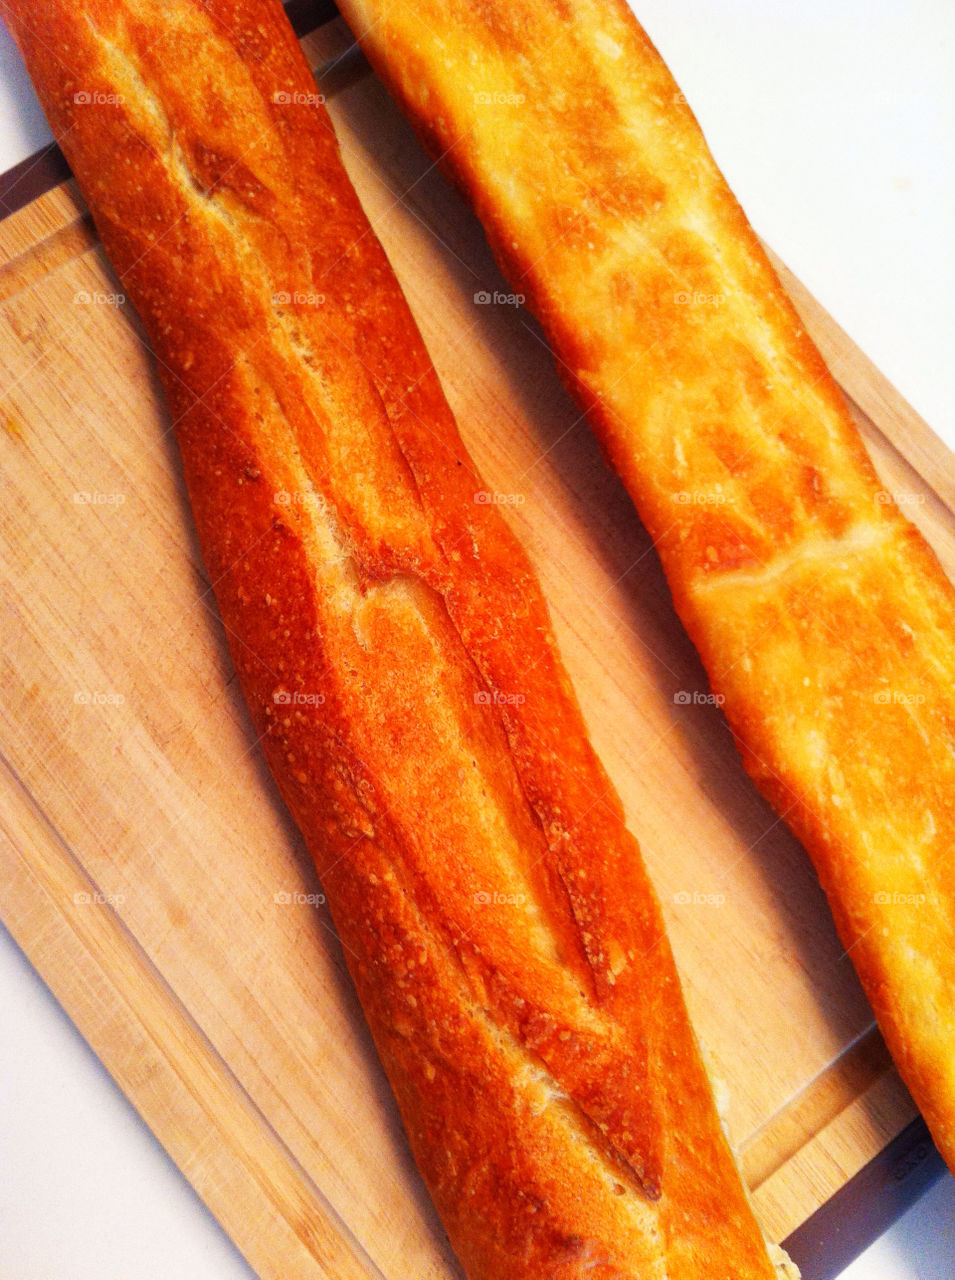 bread french baked baguette by percypiglet